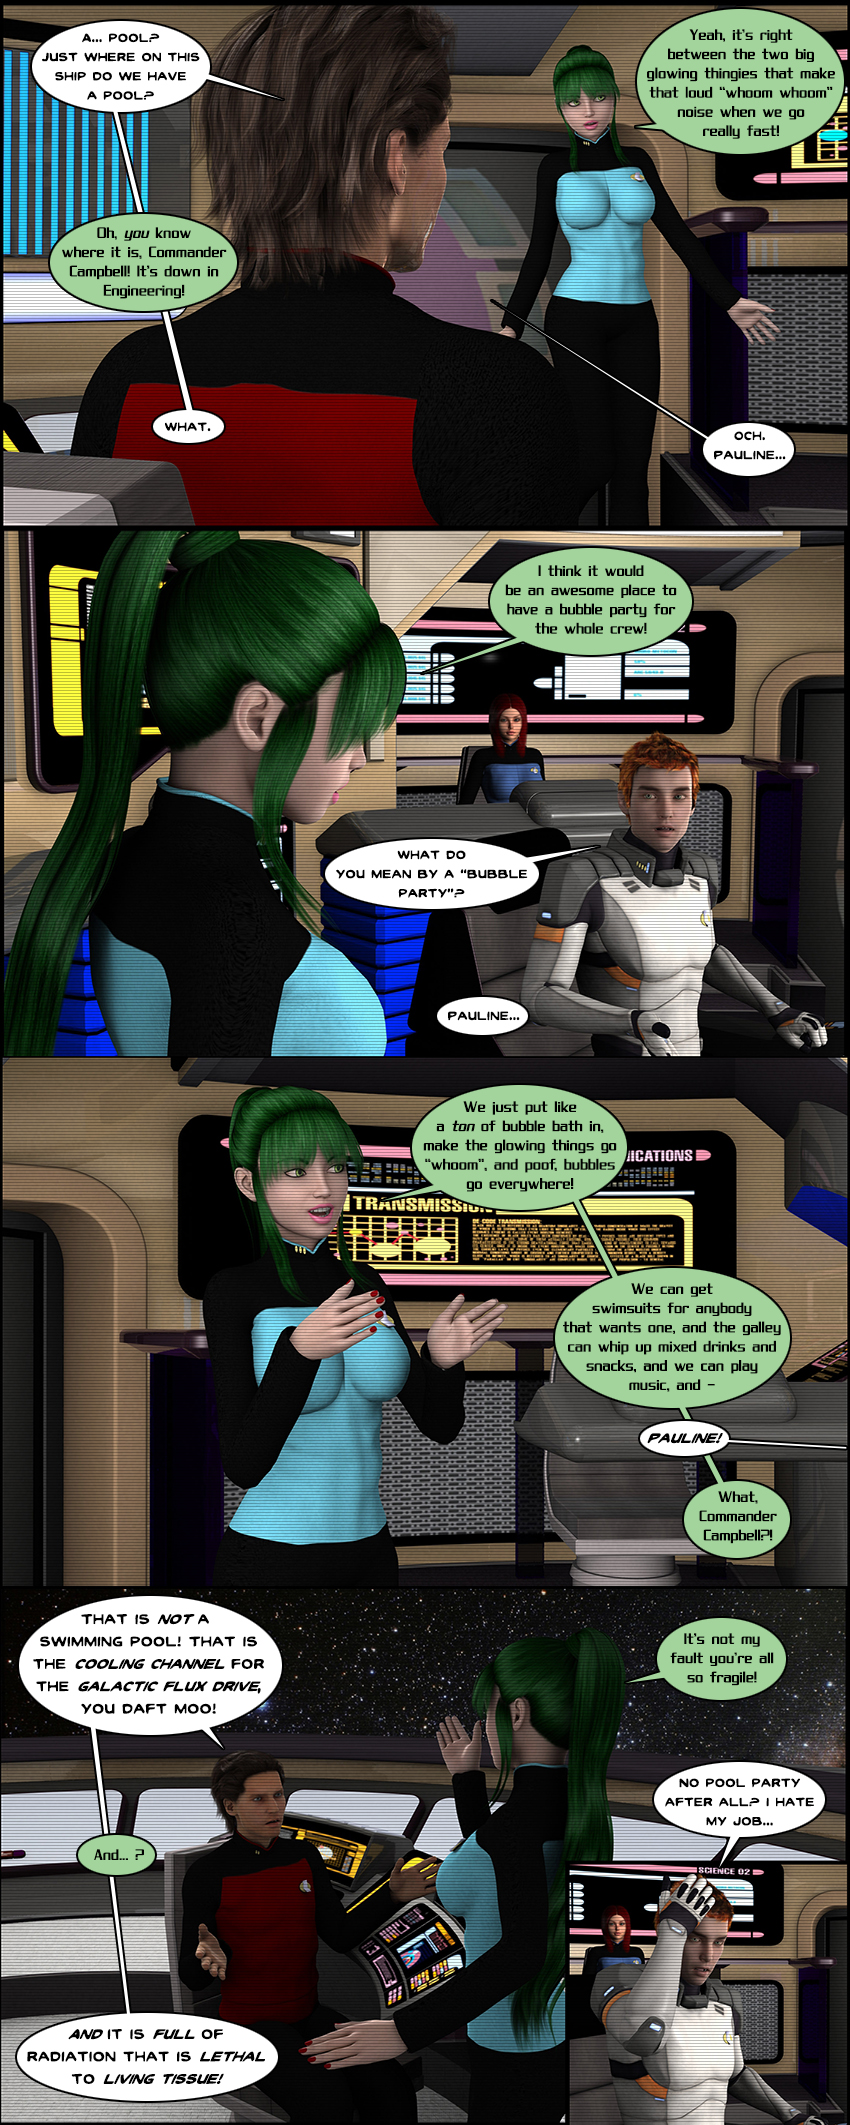 Galactic Frontiers! - page 2